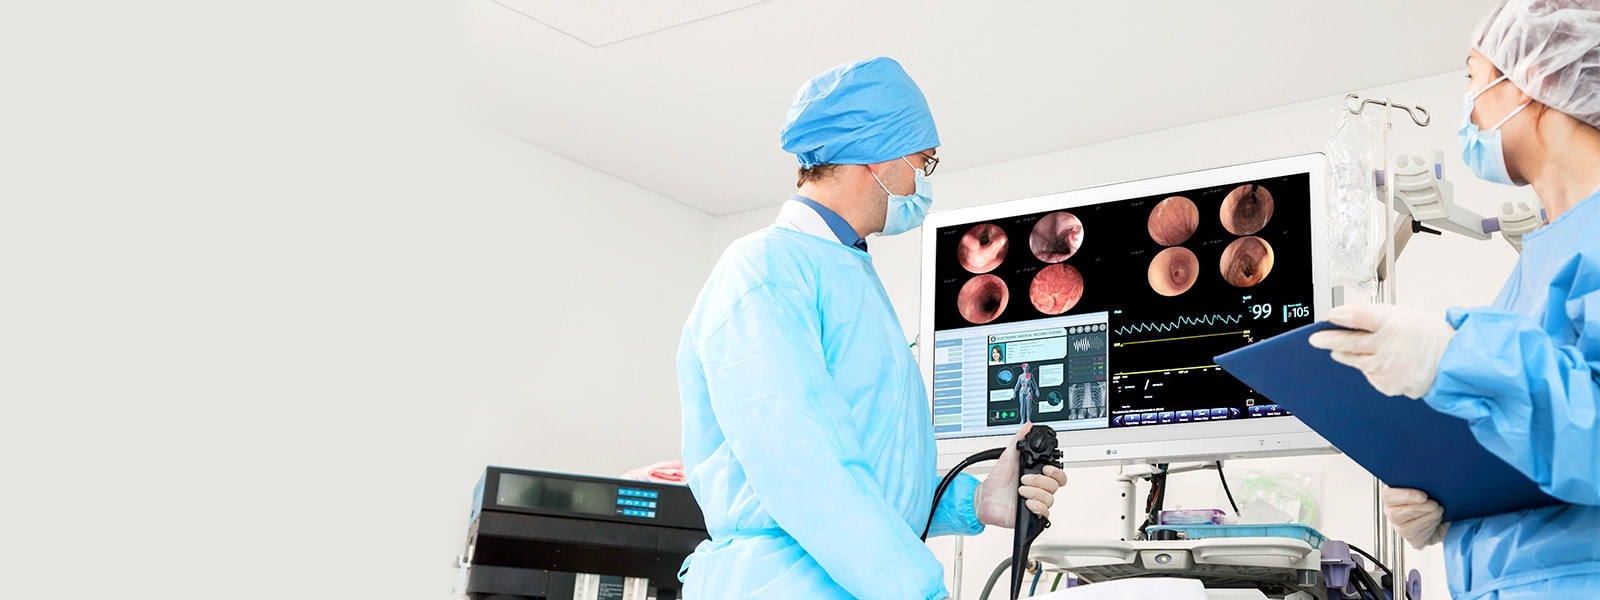 Surgical monitors helping users perform ideally detailed surgery 